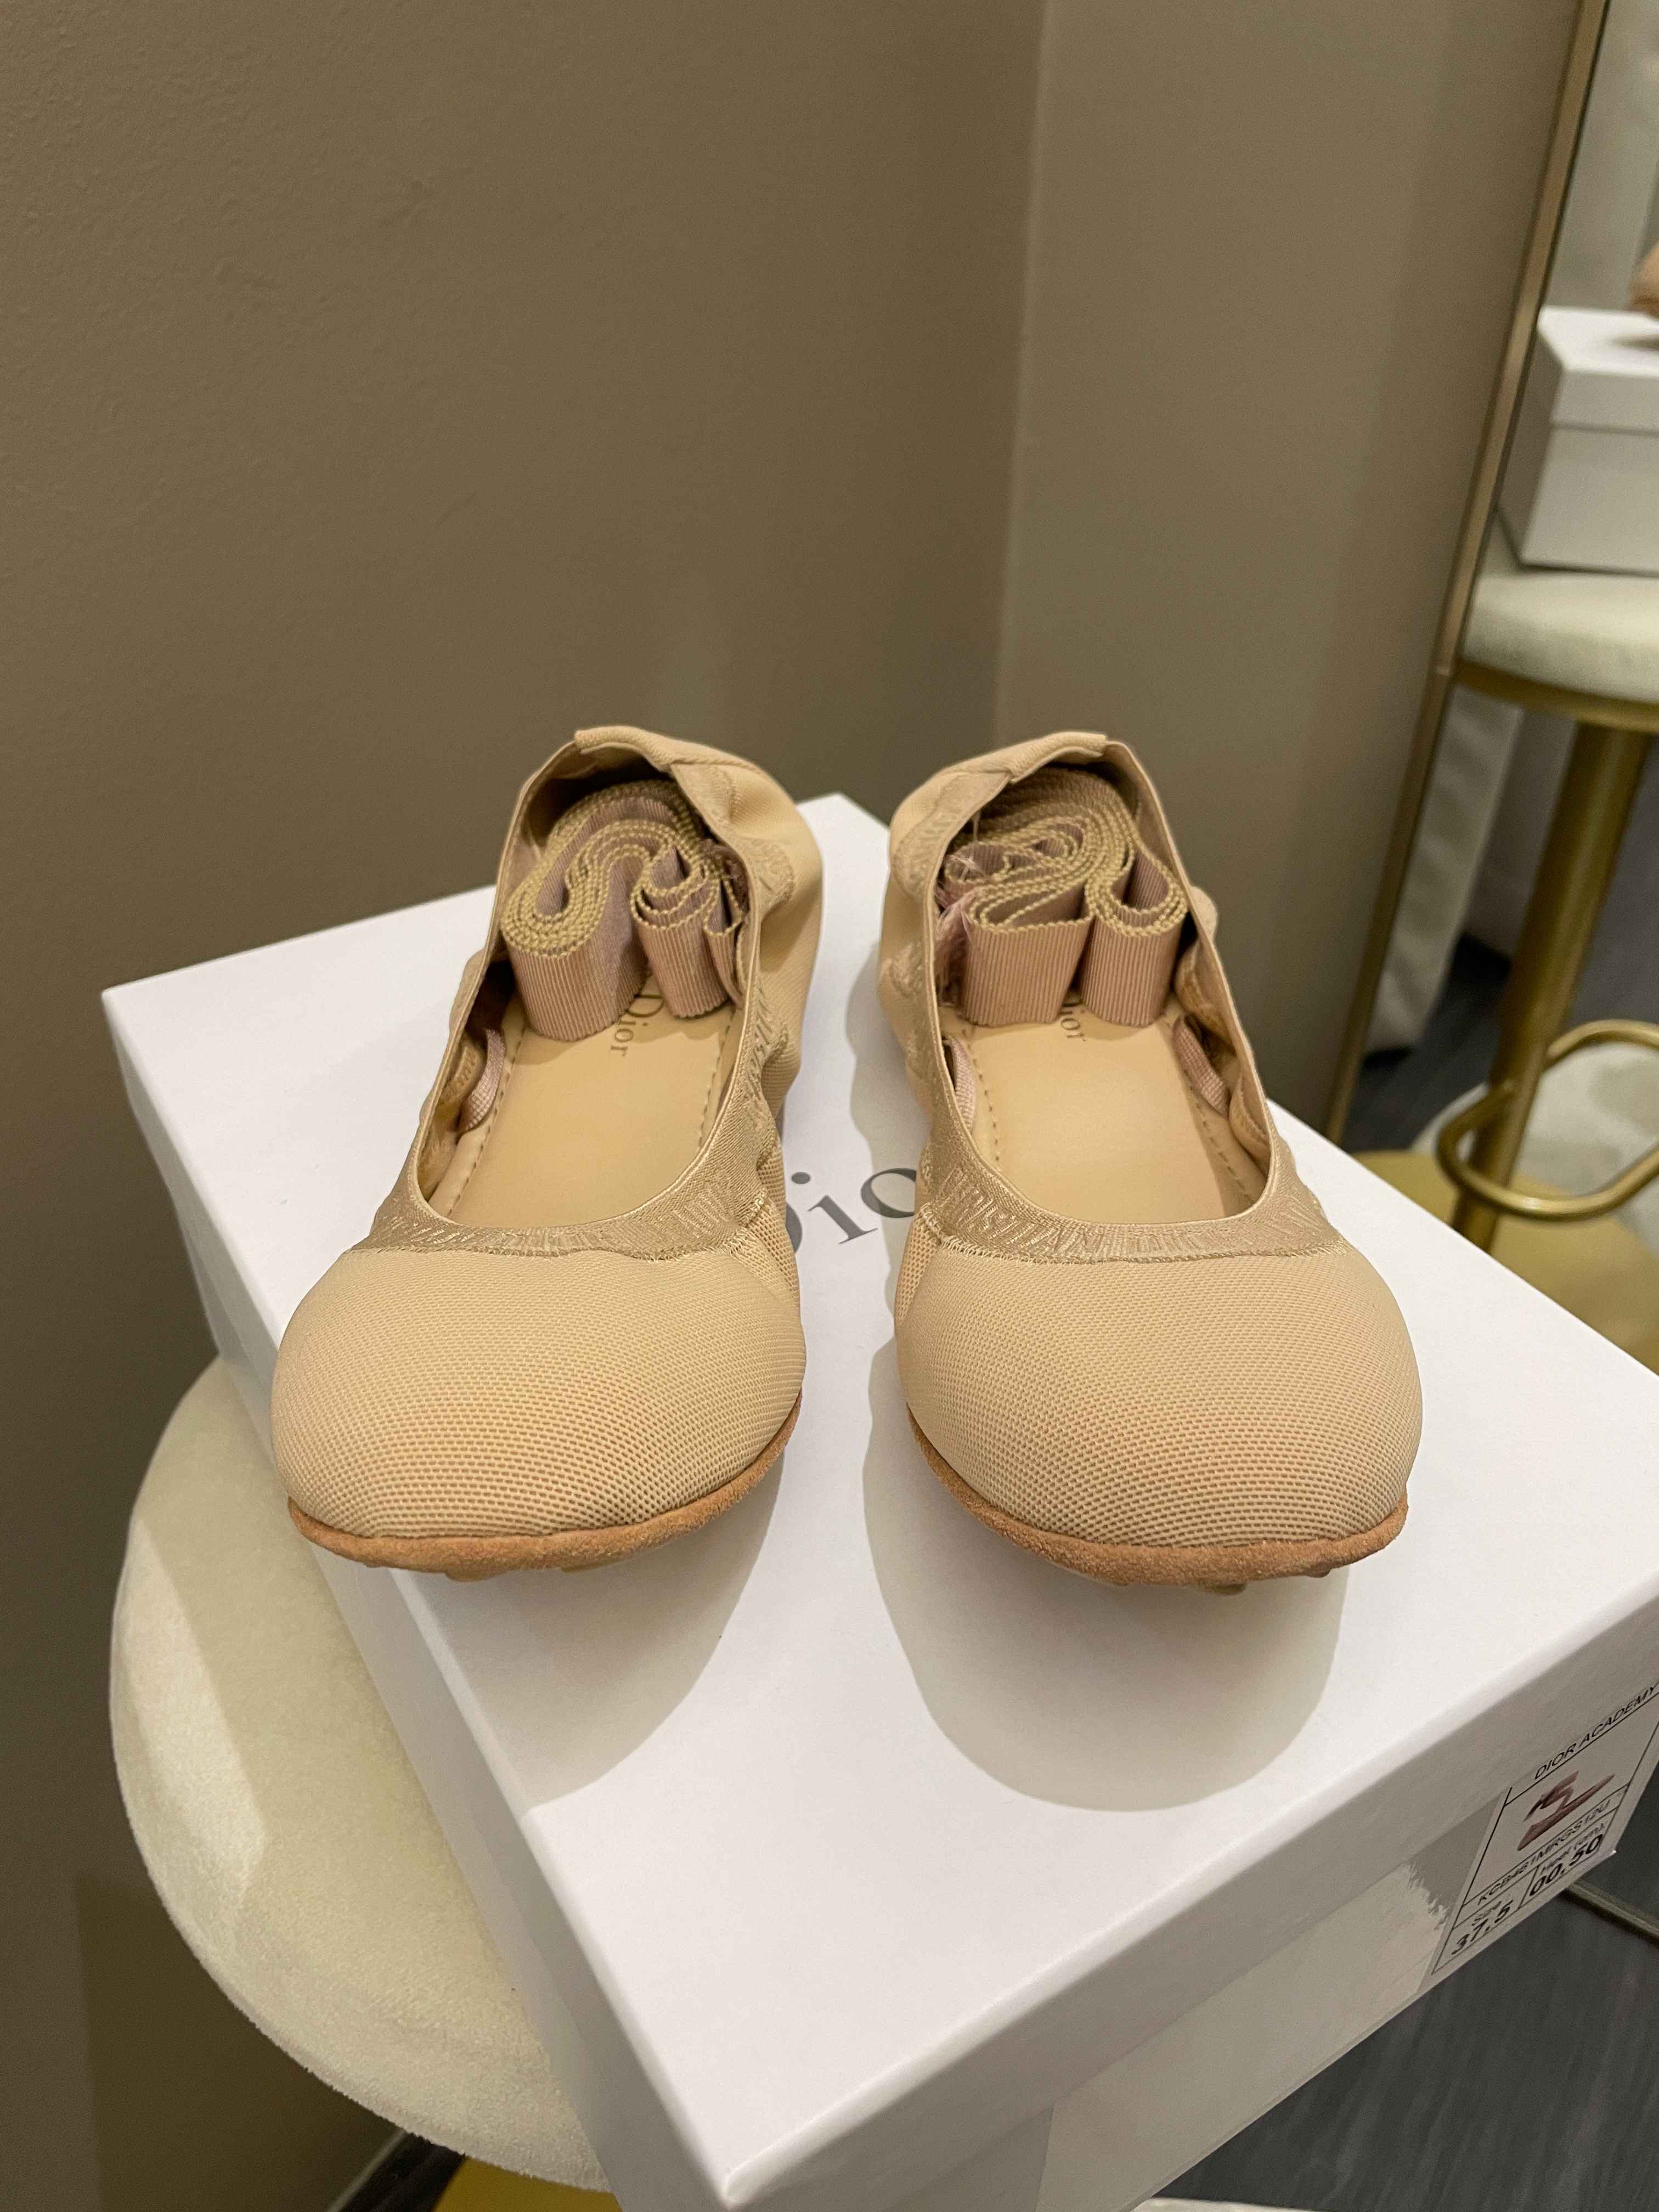 Dior Academy Lace Up Ballerina Nude Beige Size 37.5